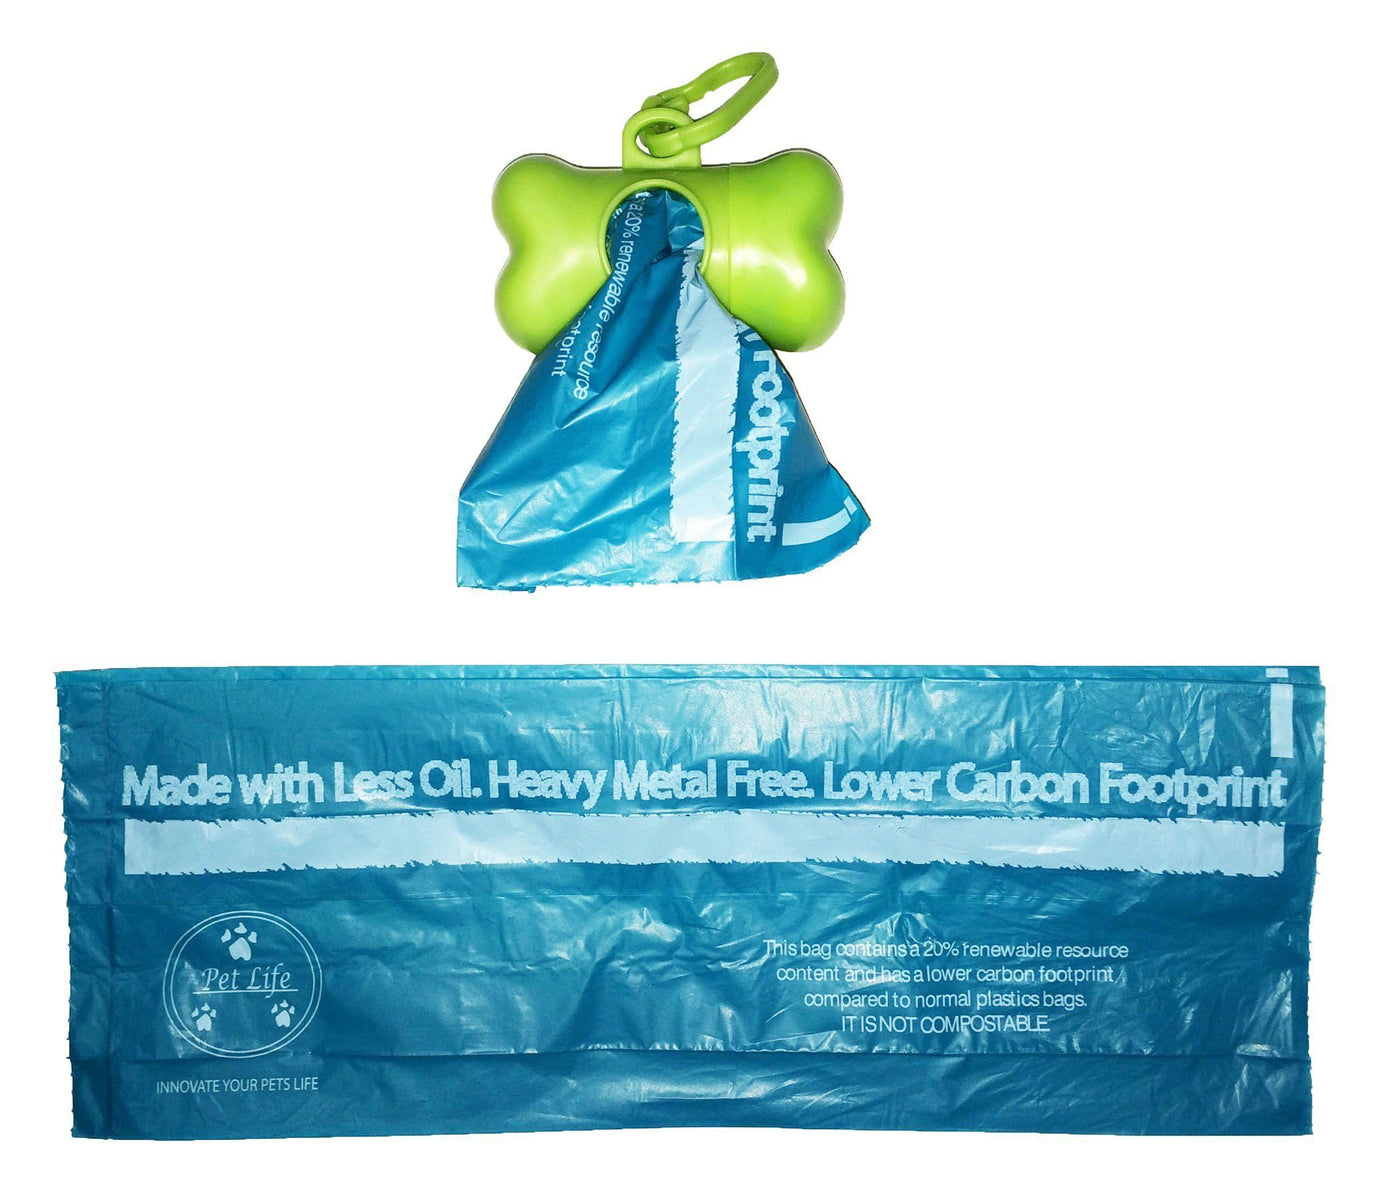 https://shop.petlife.com/cdn/shop/products/pet-life-r-bio-hybrid-100-recyclable-thermoplastic-and-polyethylene-carbon-reduced-eco-friendly-pet-cat-dog-waste-bags-from-renewable-thermoplastic-starch-dispenser-and-2-449721_1400x.jpg?v=1573785132